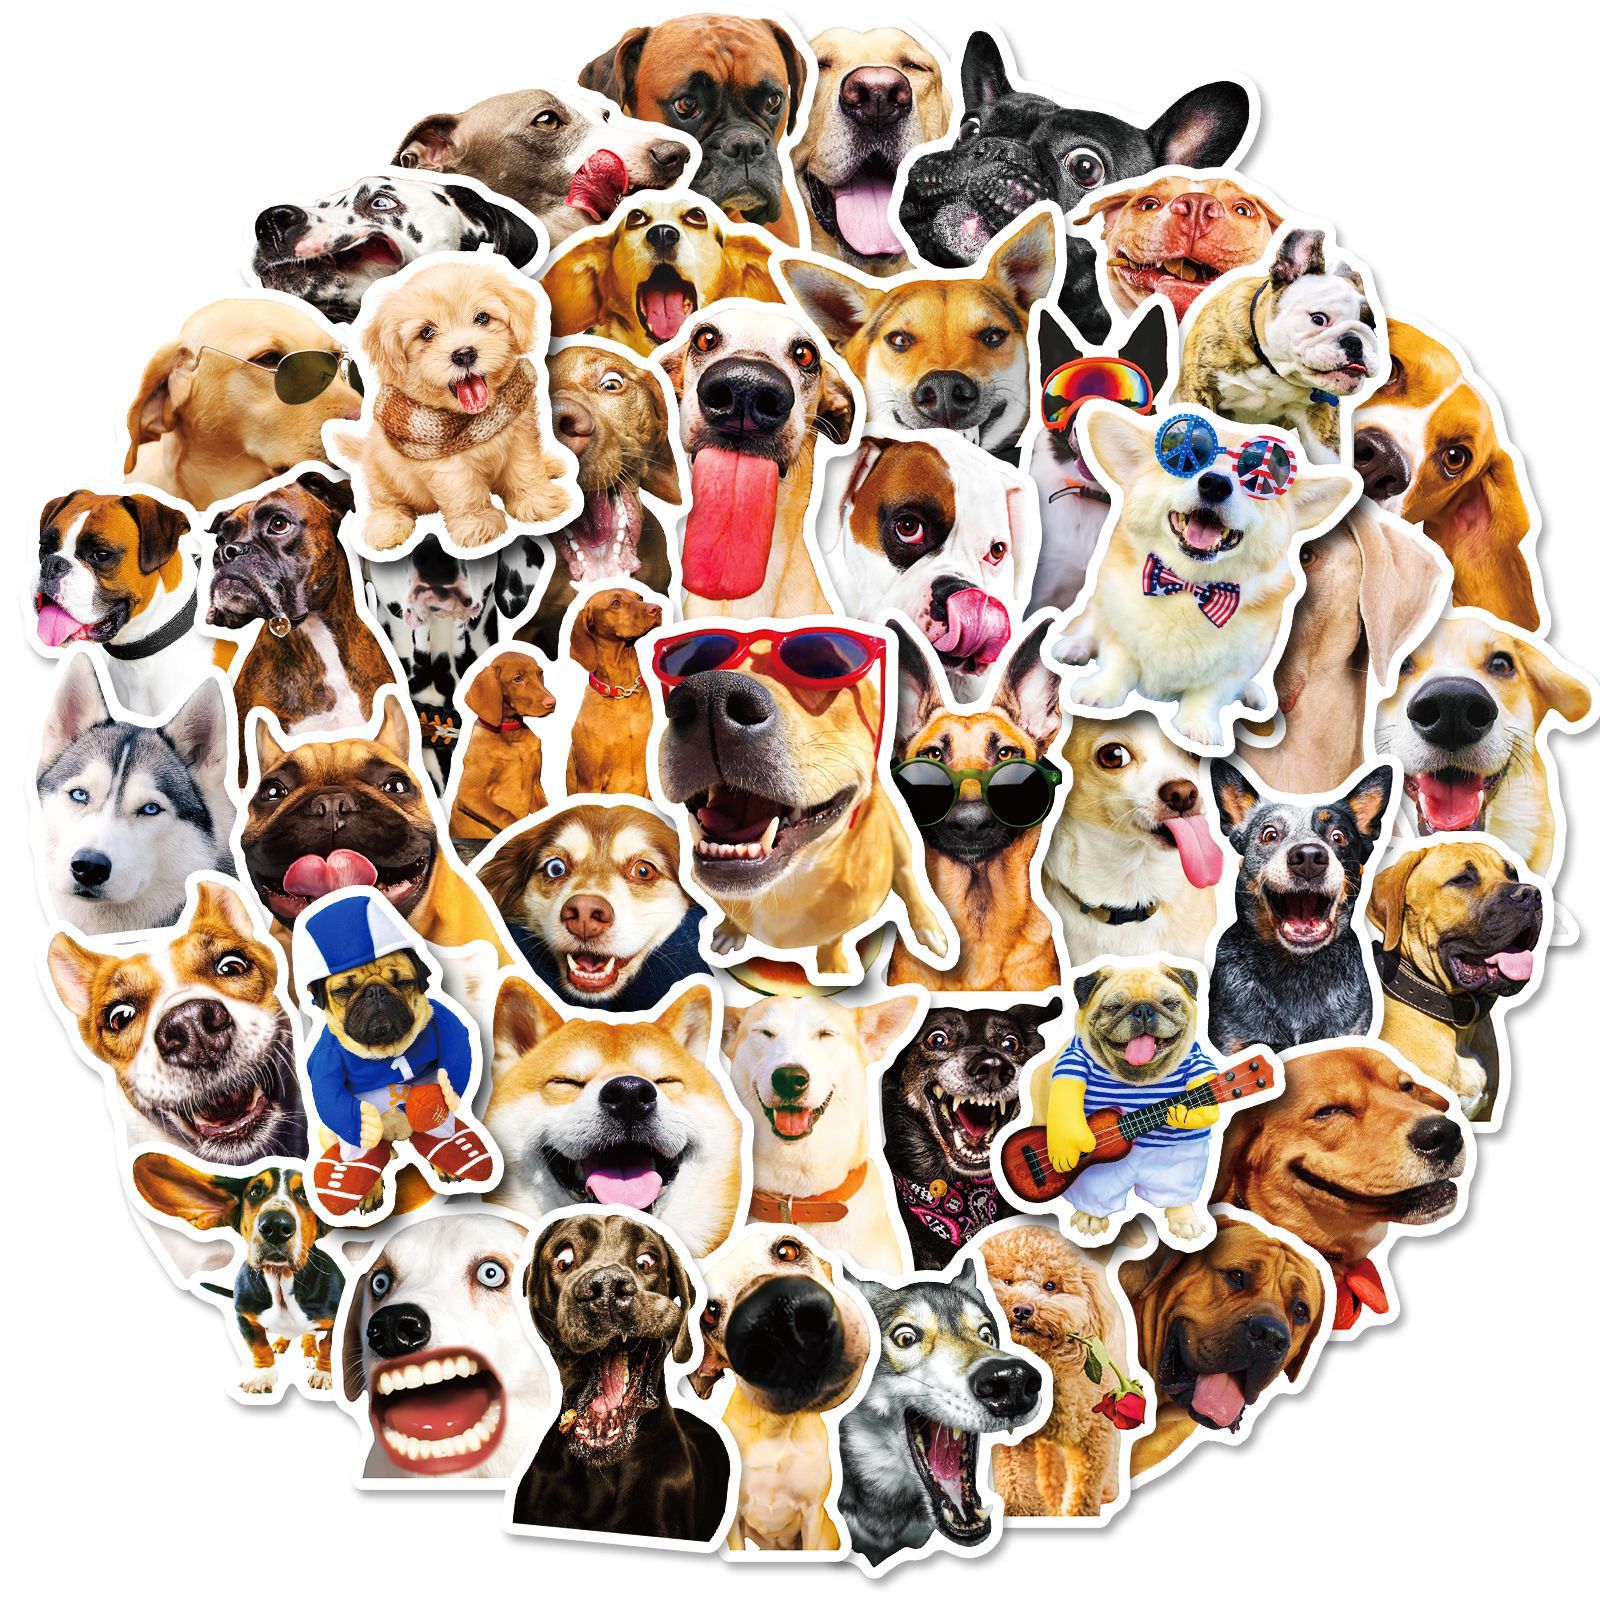 Charming Canine Sticker Collection: 50 Realistic Dog & Puppy Decals